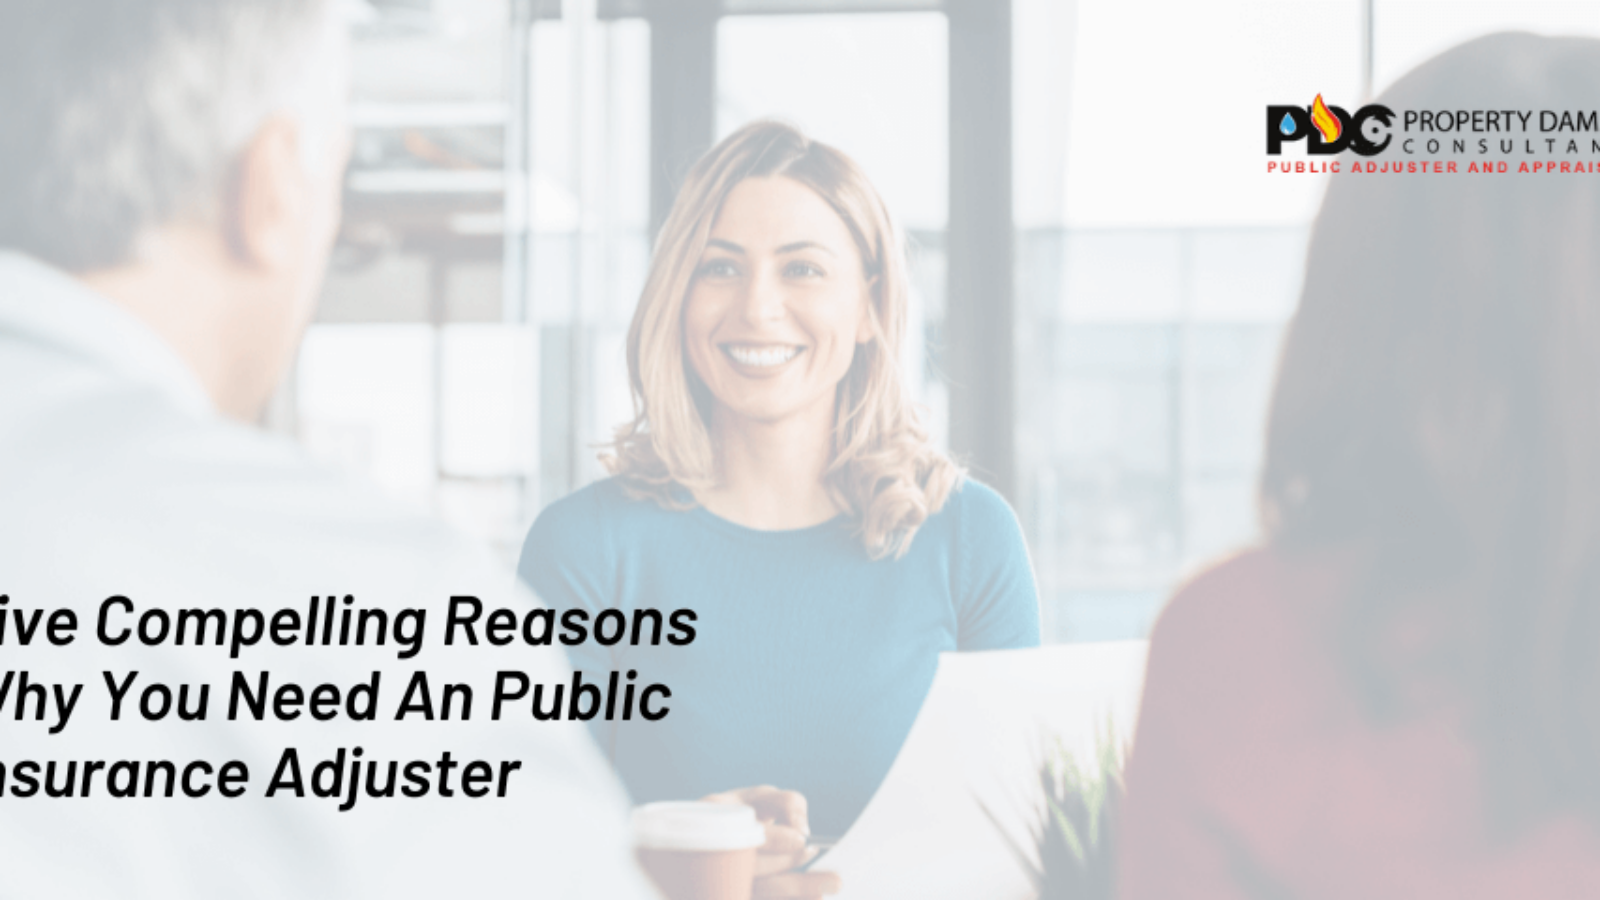 Five-Compelling-Reasons-Why-You-Need-An-Public-Insurance-Adjuster-960x480